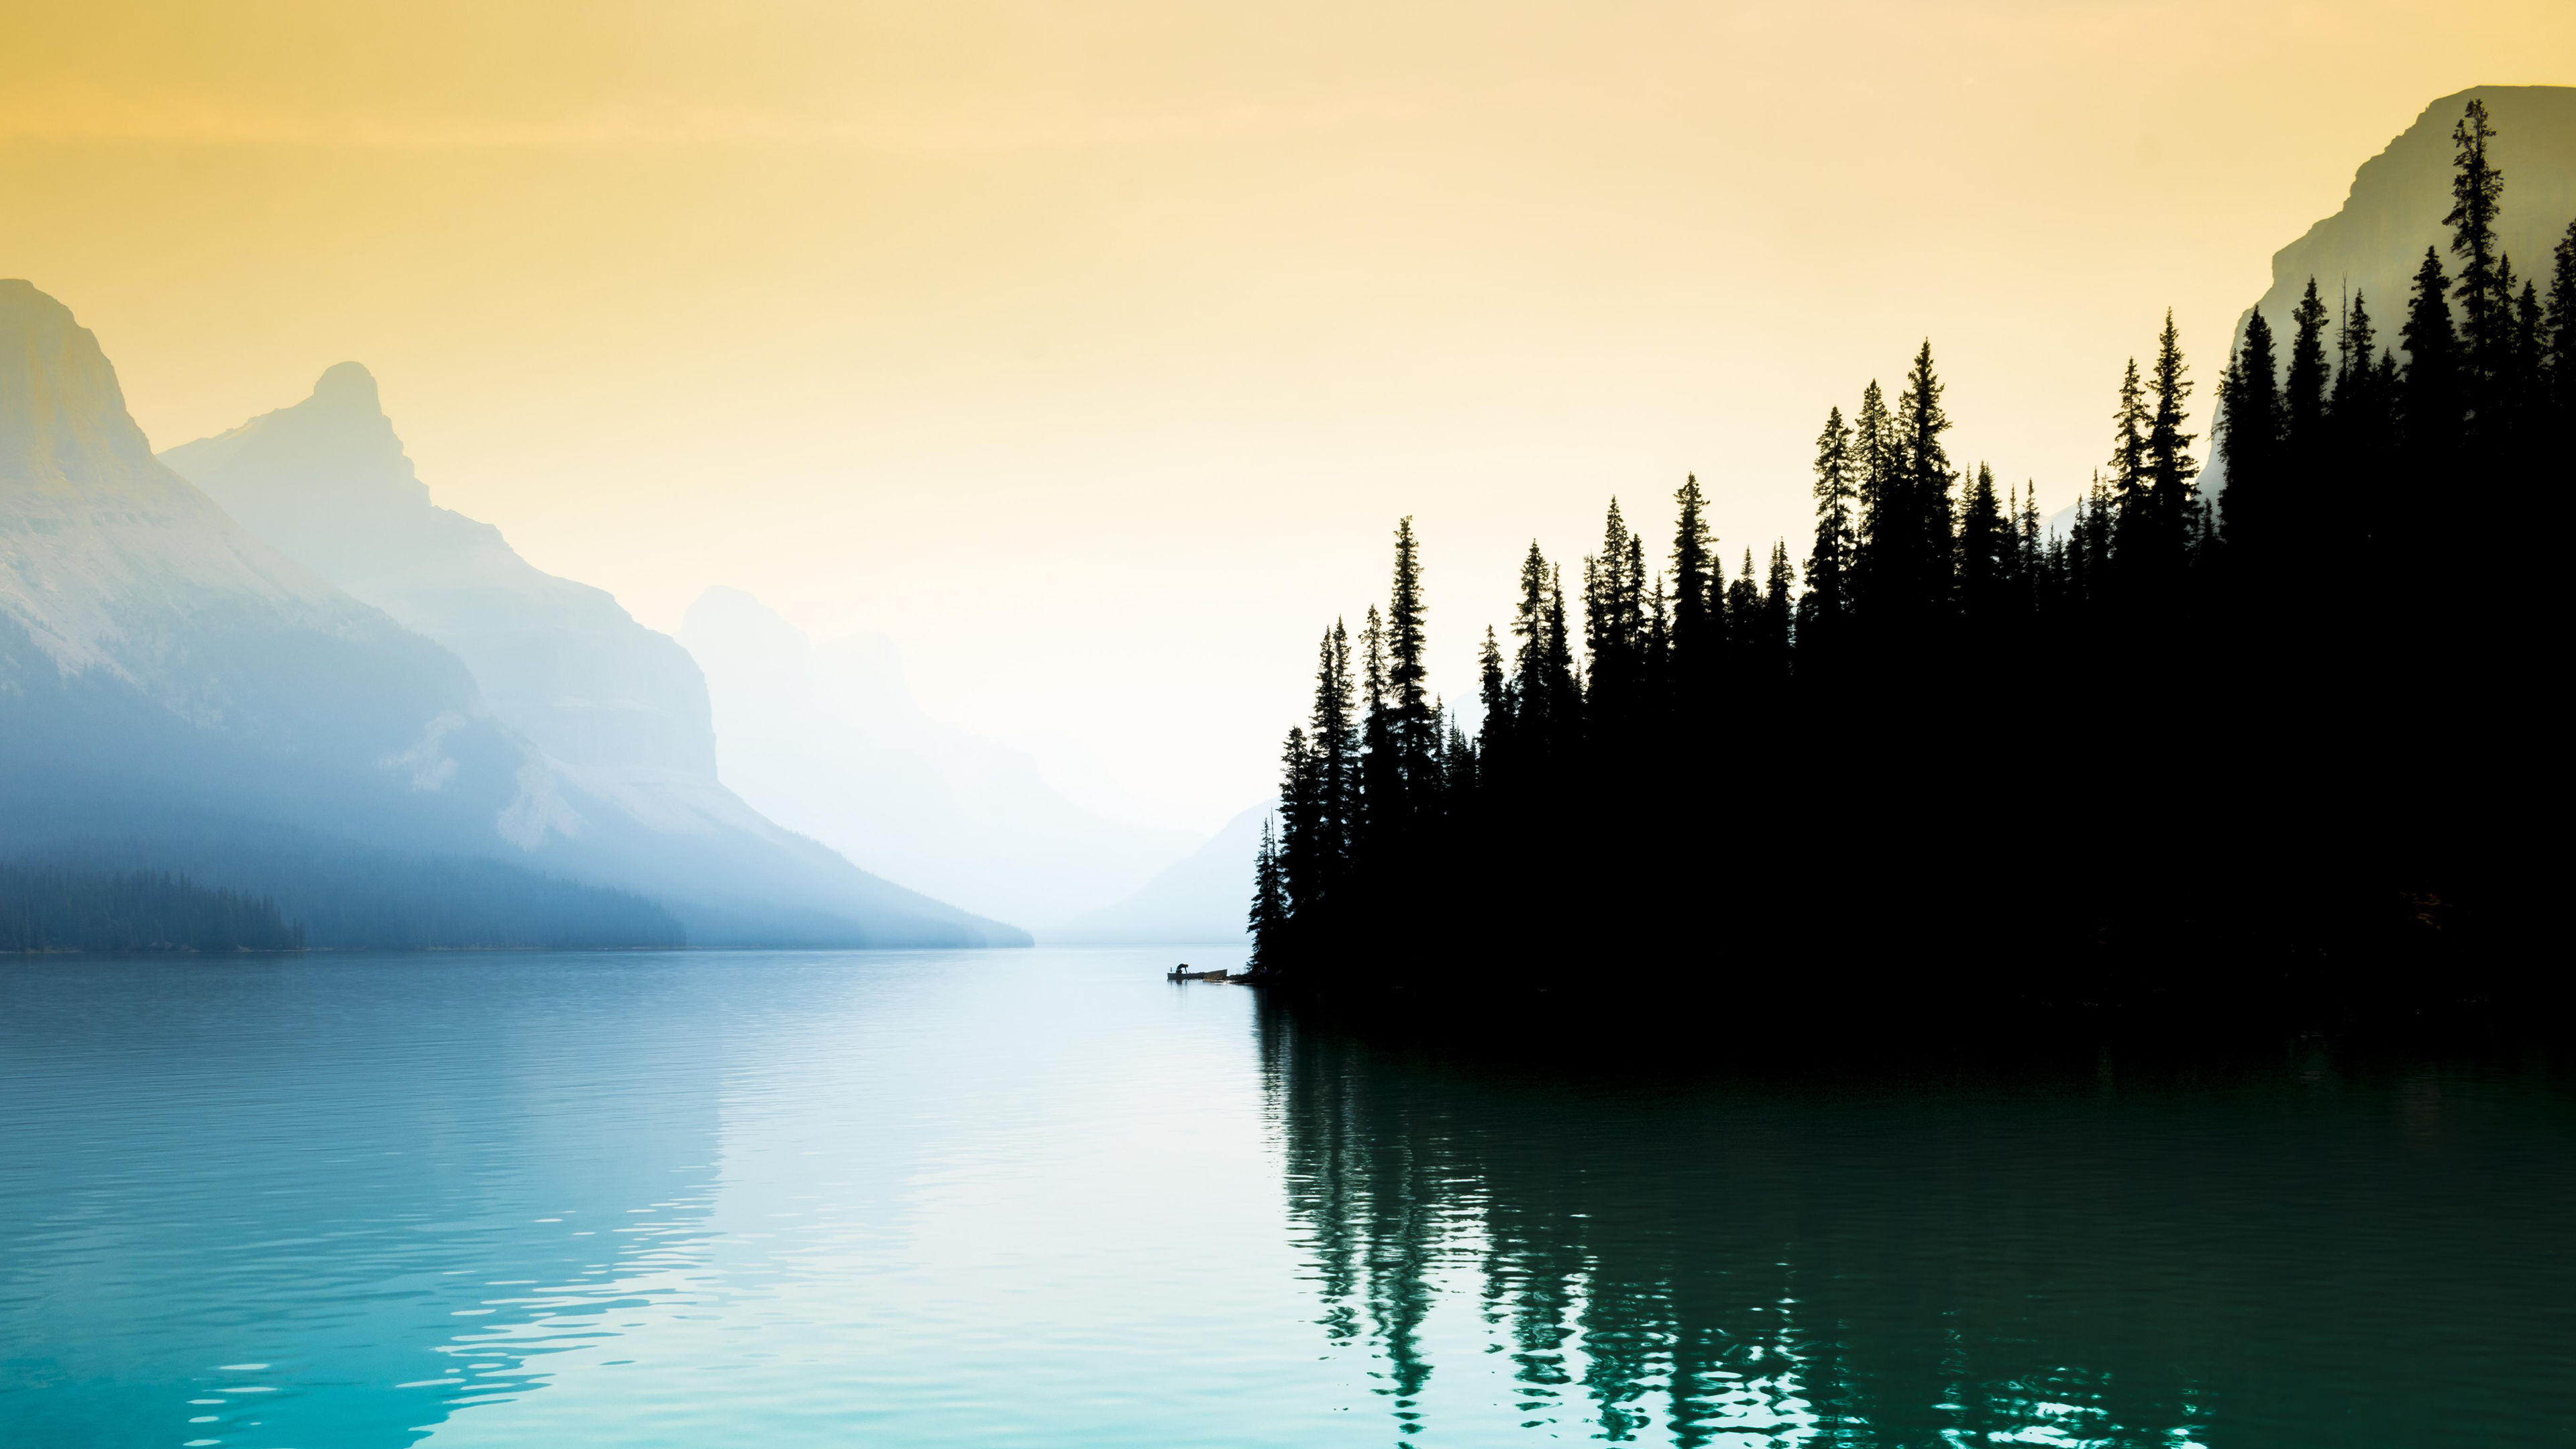 General 3840x2160 landscape river mountains pine trees mist nature sky calm calm waters trees